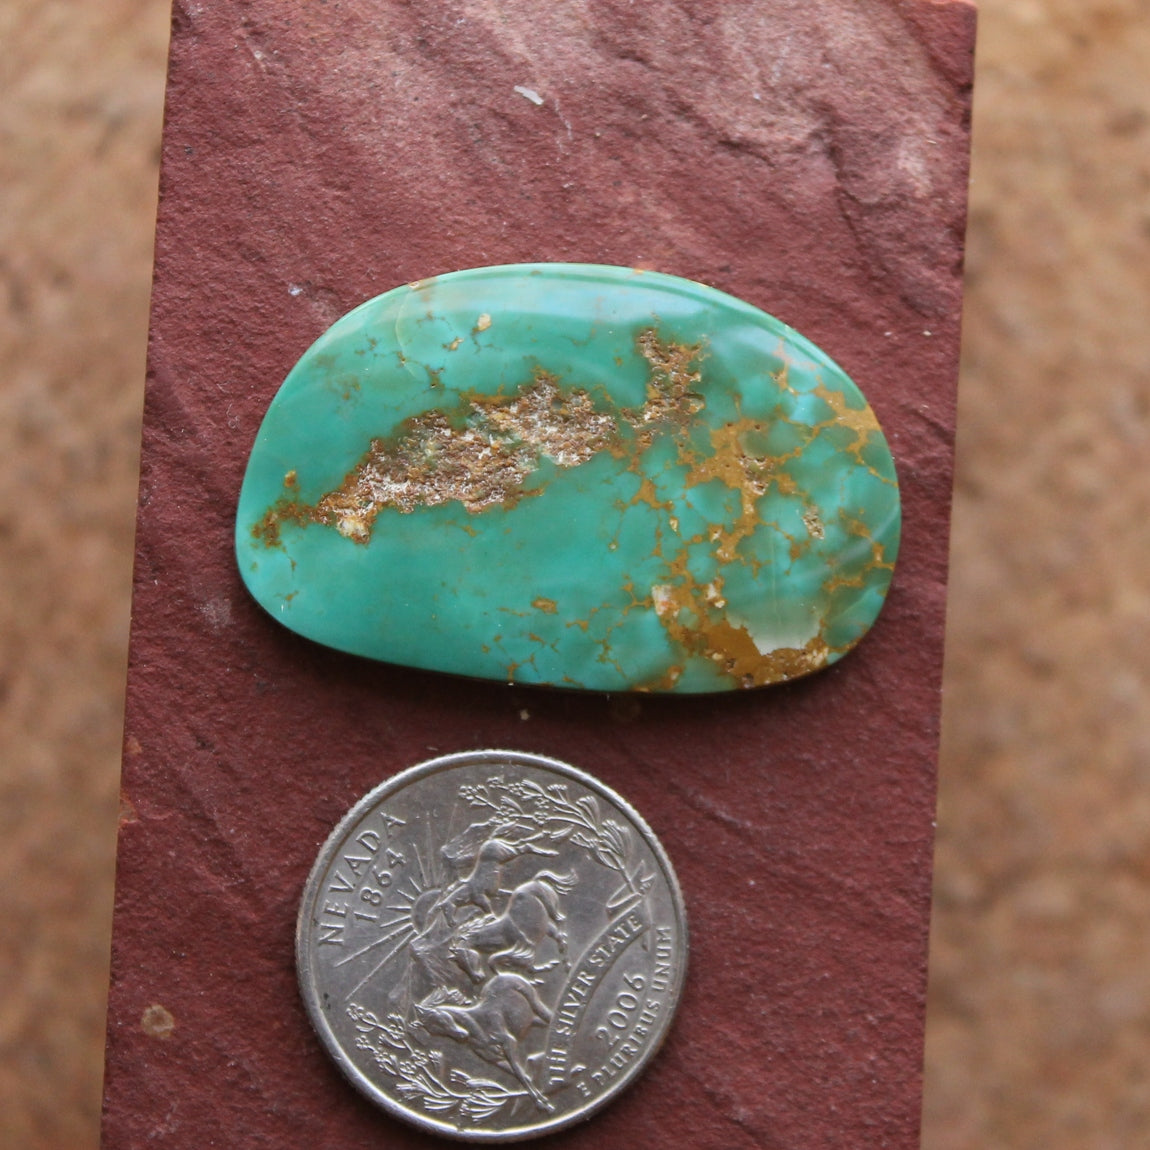 40 carat green Stone Mountain Turquoise cabochon